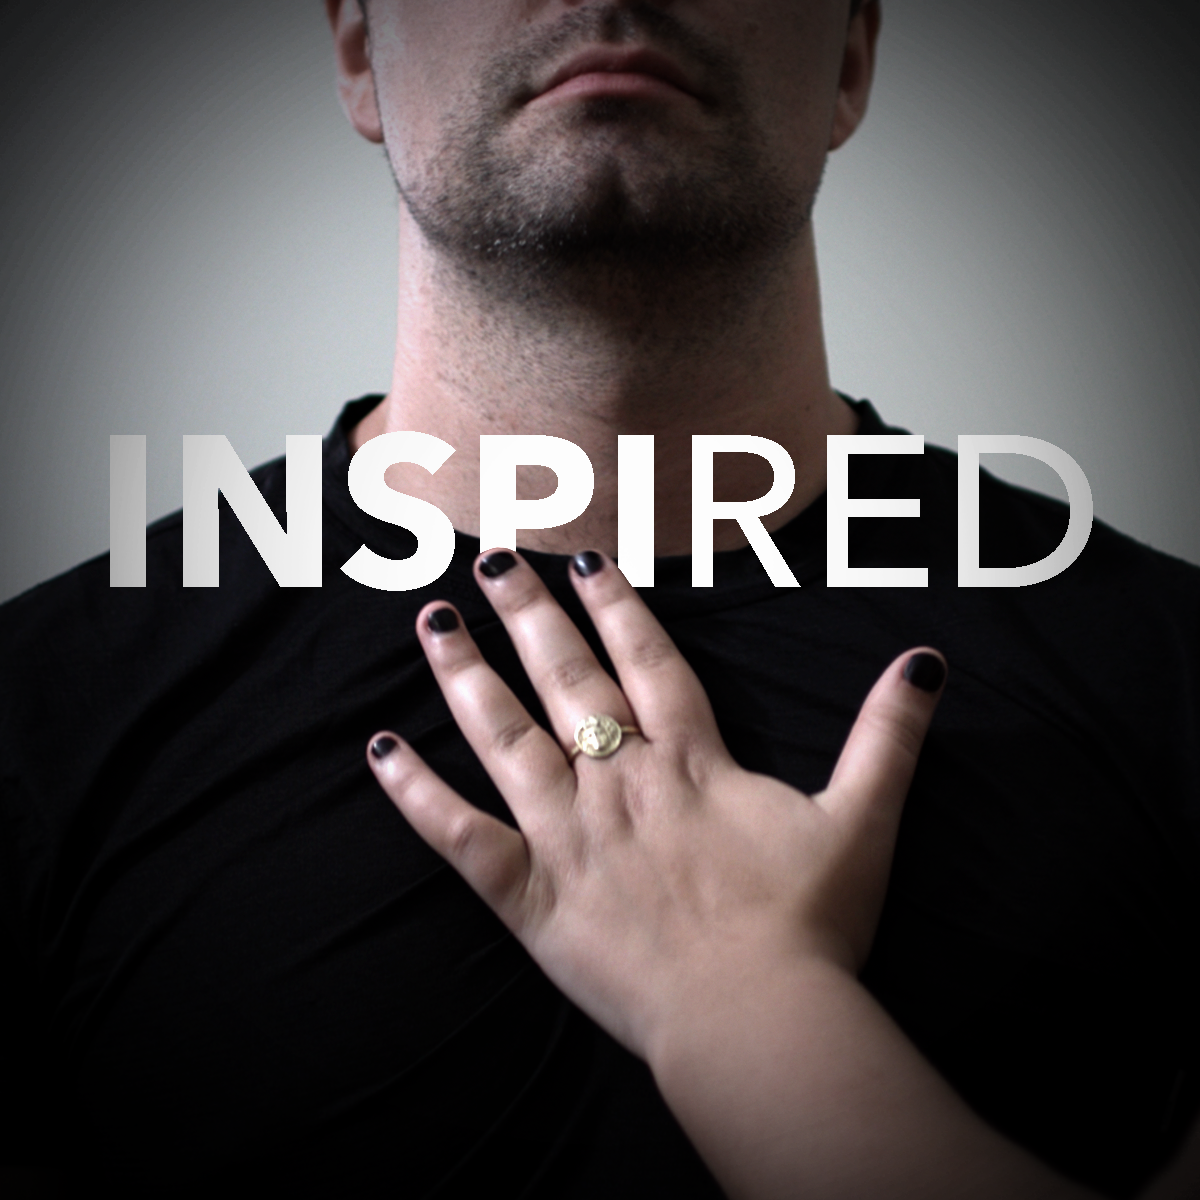 A hand with fingers spread, palm facing a person's chest with a text overlay that reads "Inspired"